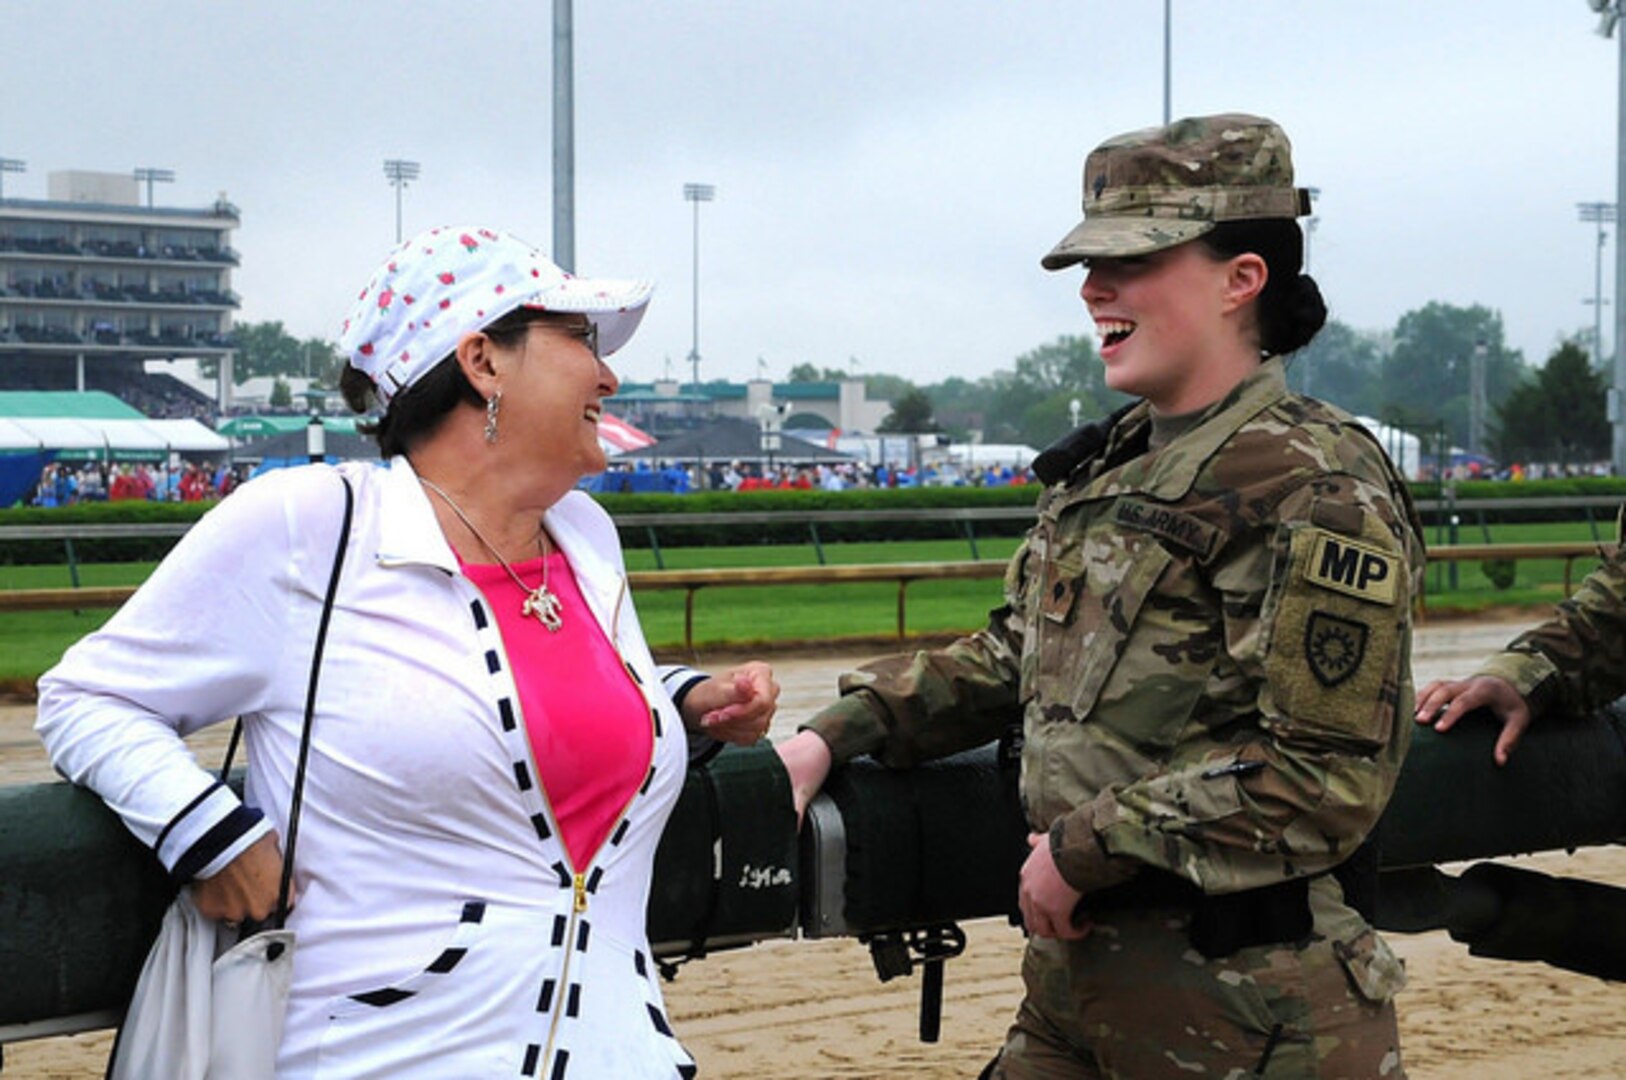 Kentucky Army National Guard member Spc. Mackenzie Kline, 617th MP Company, talks with an attendee at the 144th Kentucky Derby at Churchill Downs May 5, 2018.